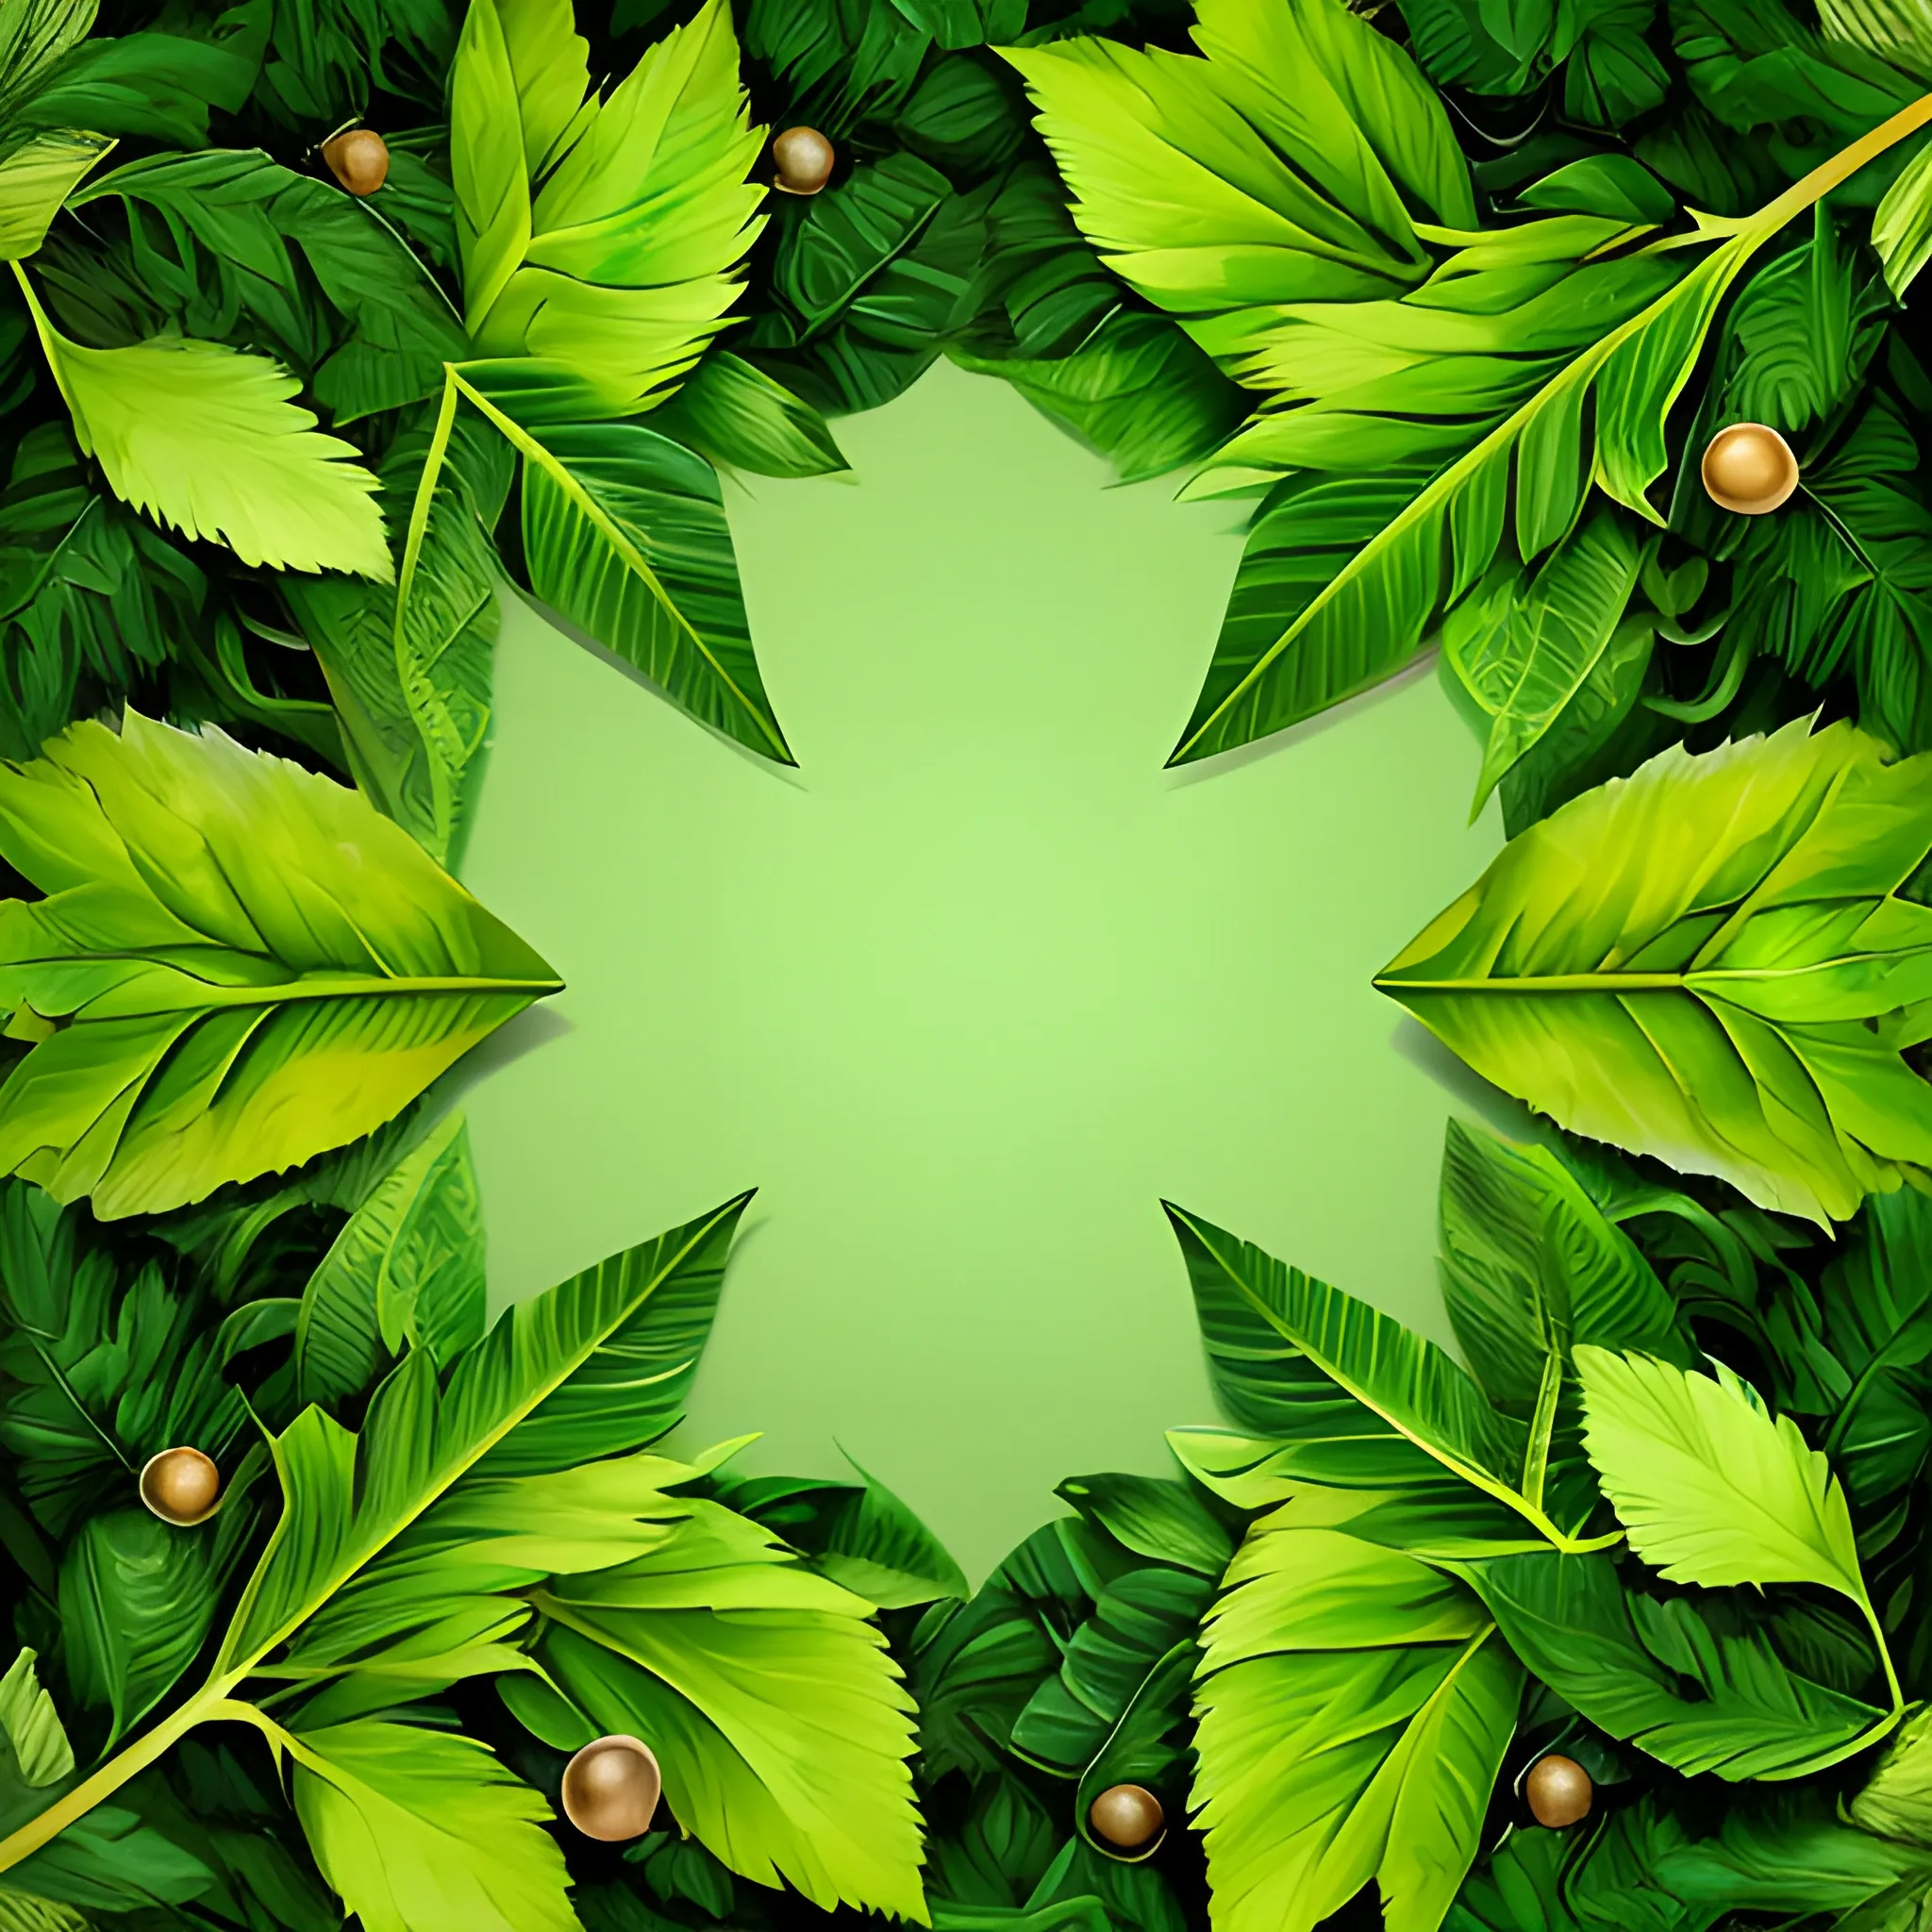 Create background image with nature, freshness, and leaves. It's a background for a natural product, so the background has to convey that.